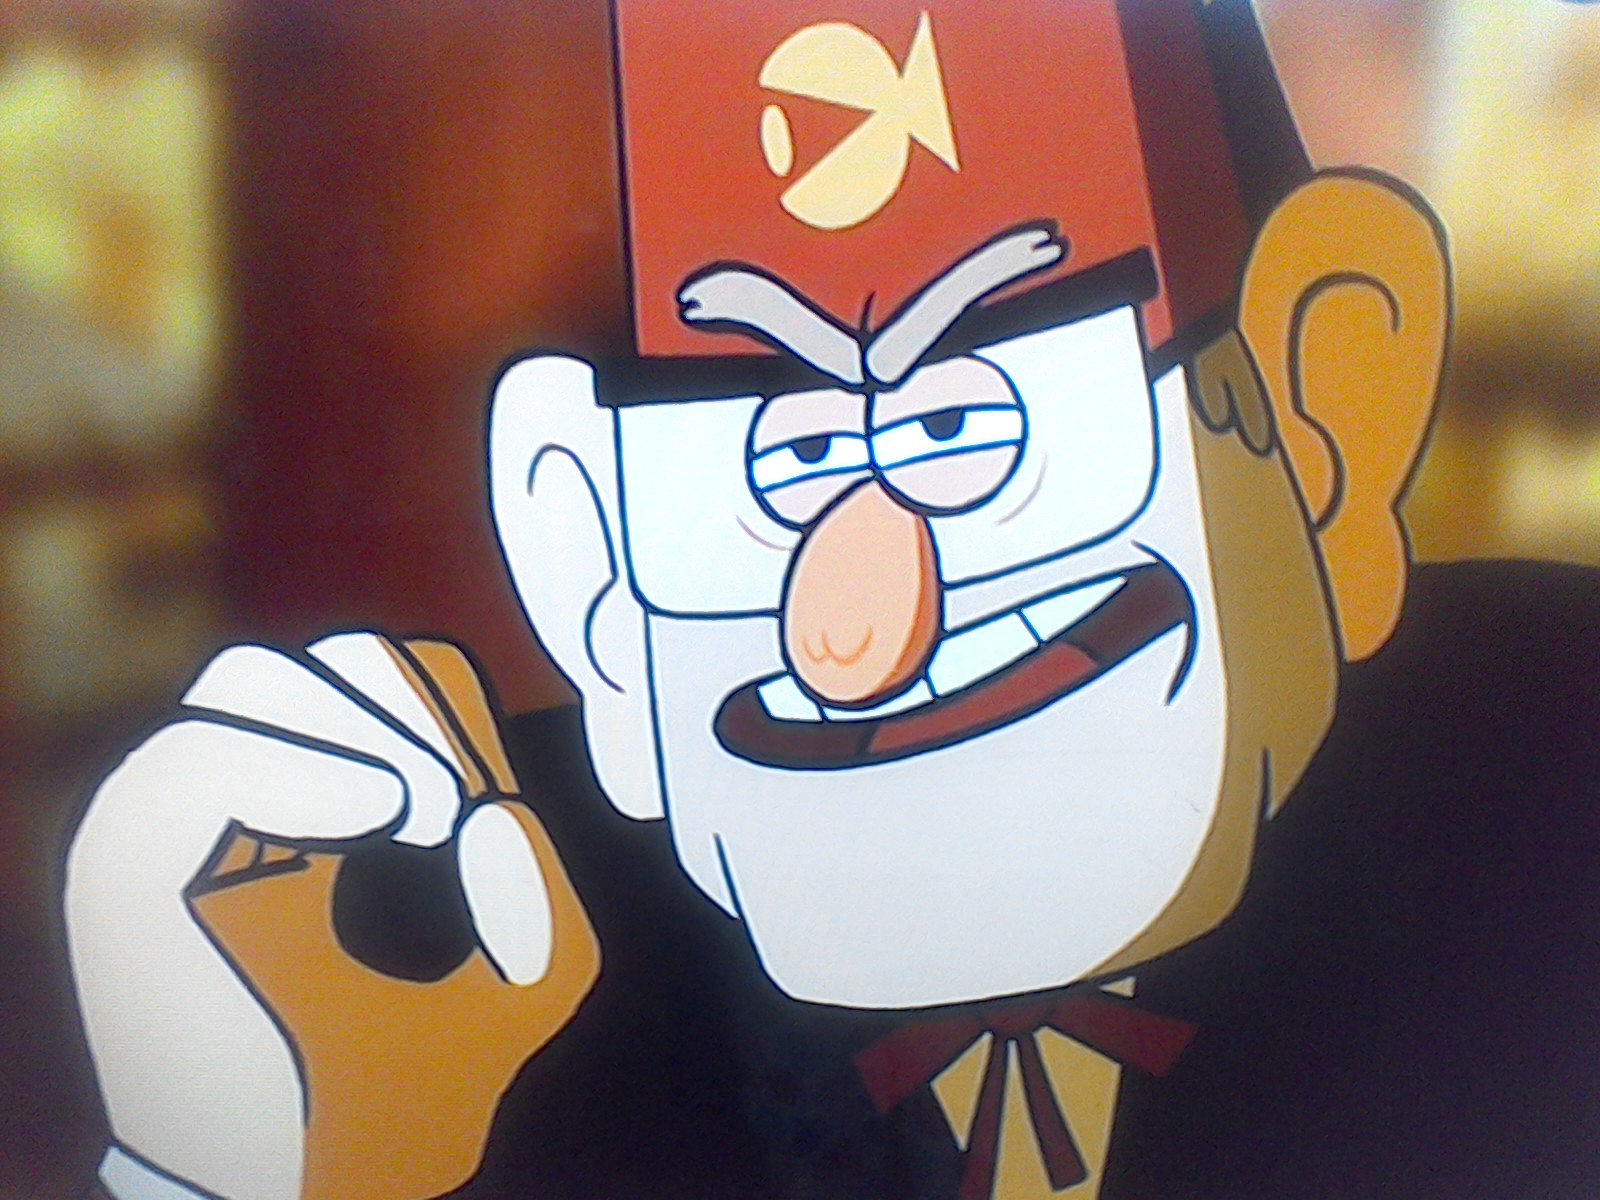 Grunkle Stan: One does not simply Blank Meme Template